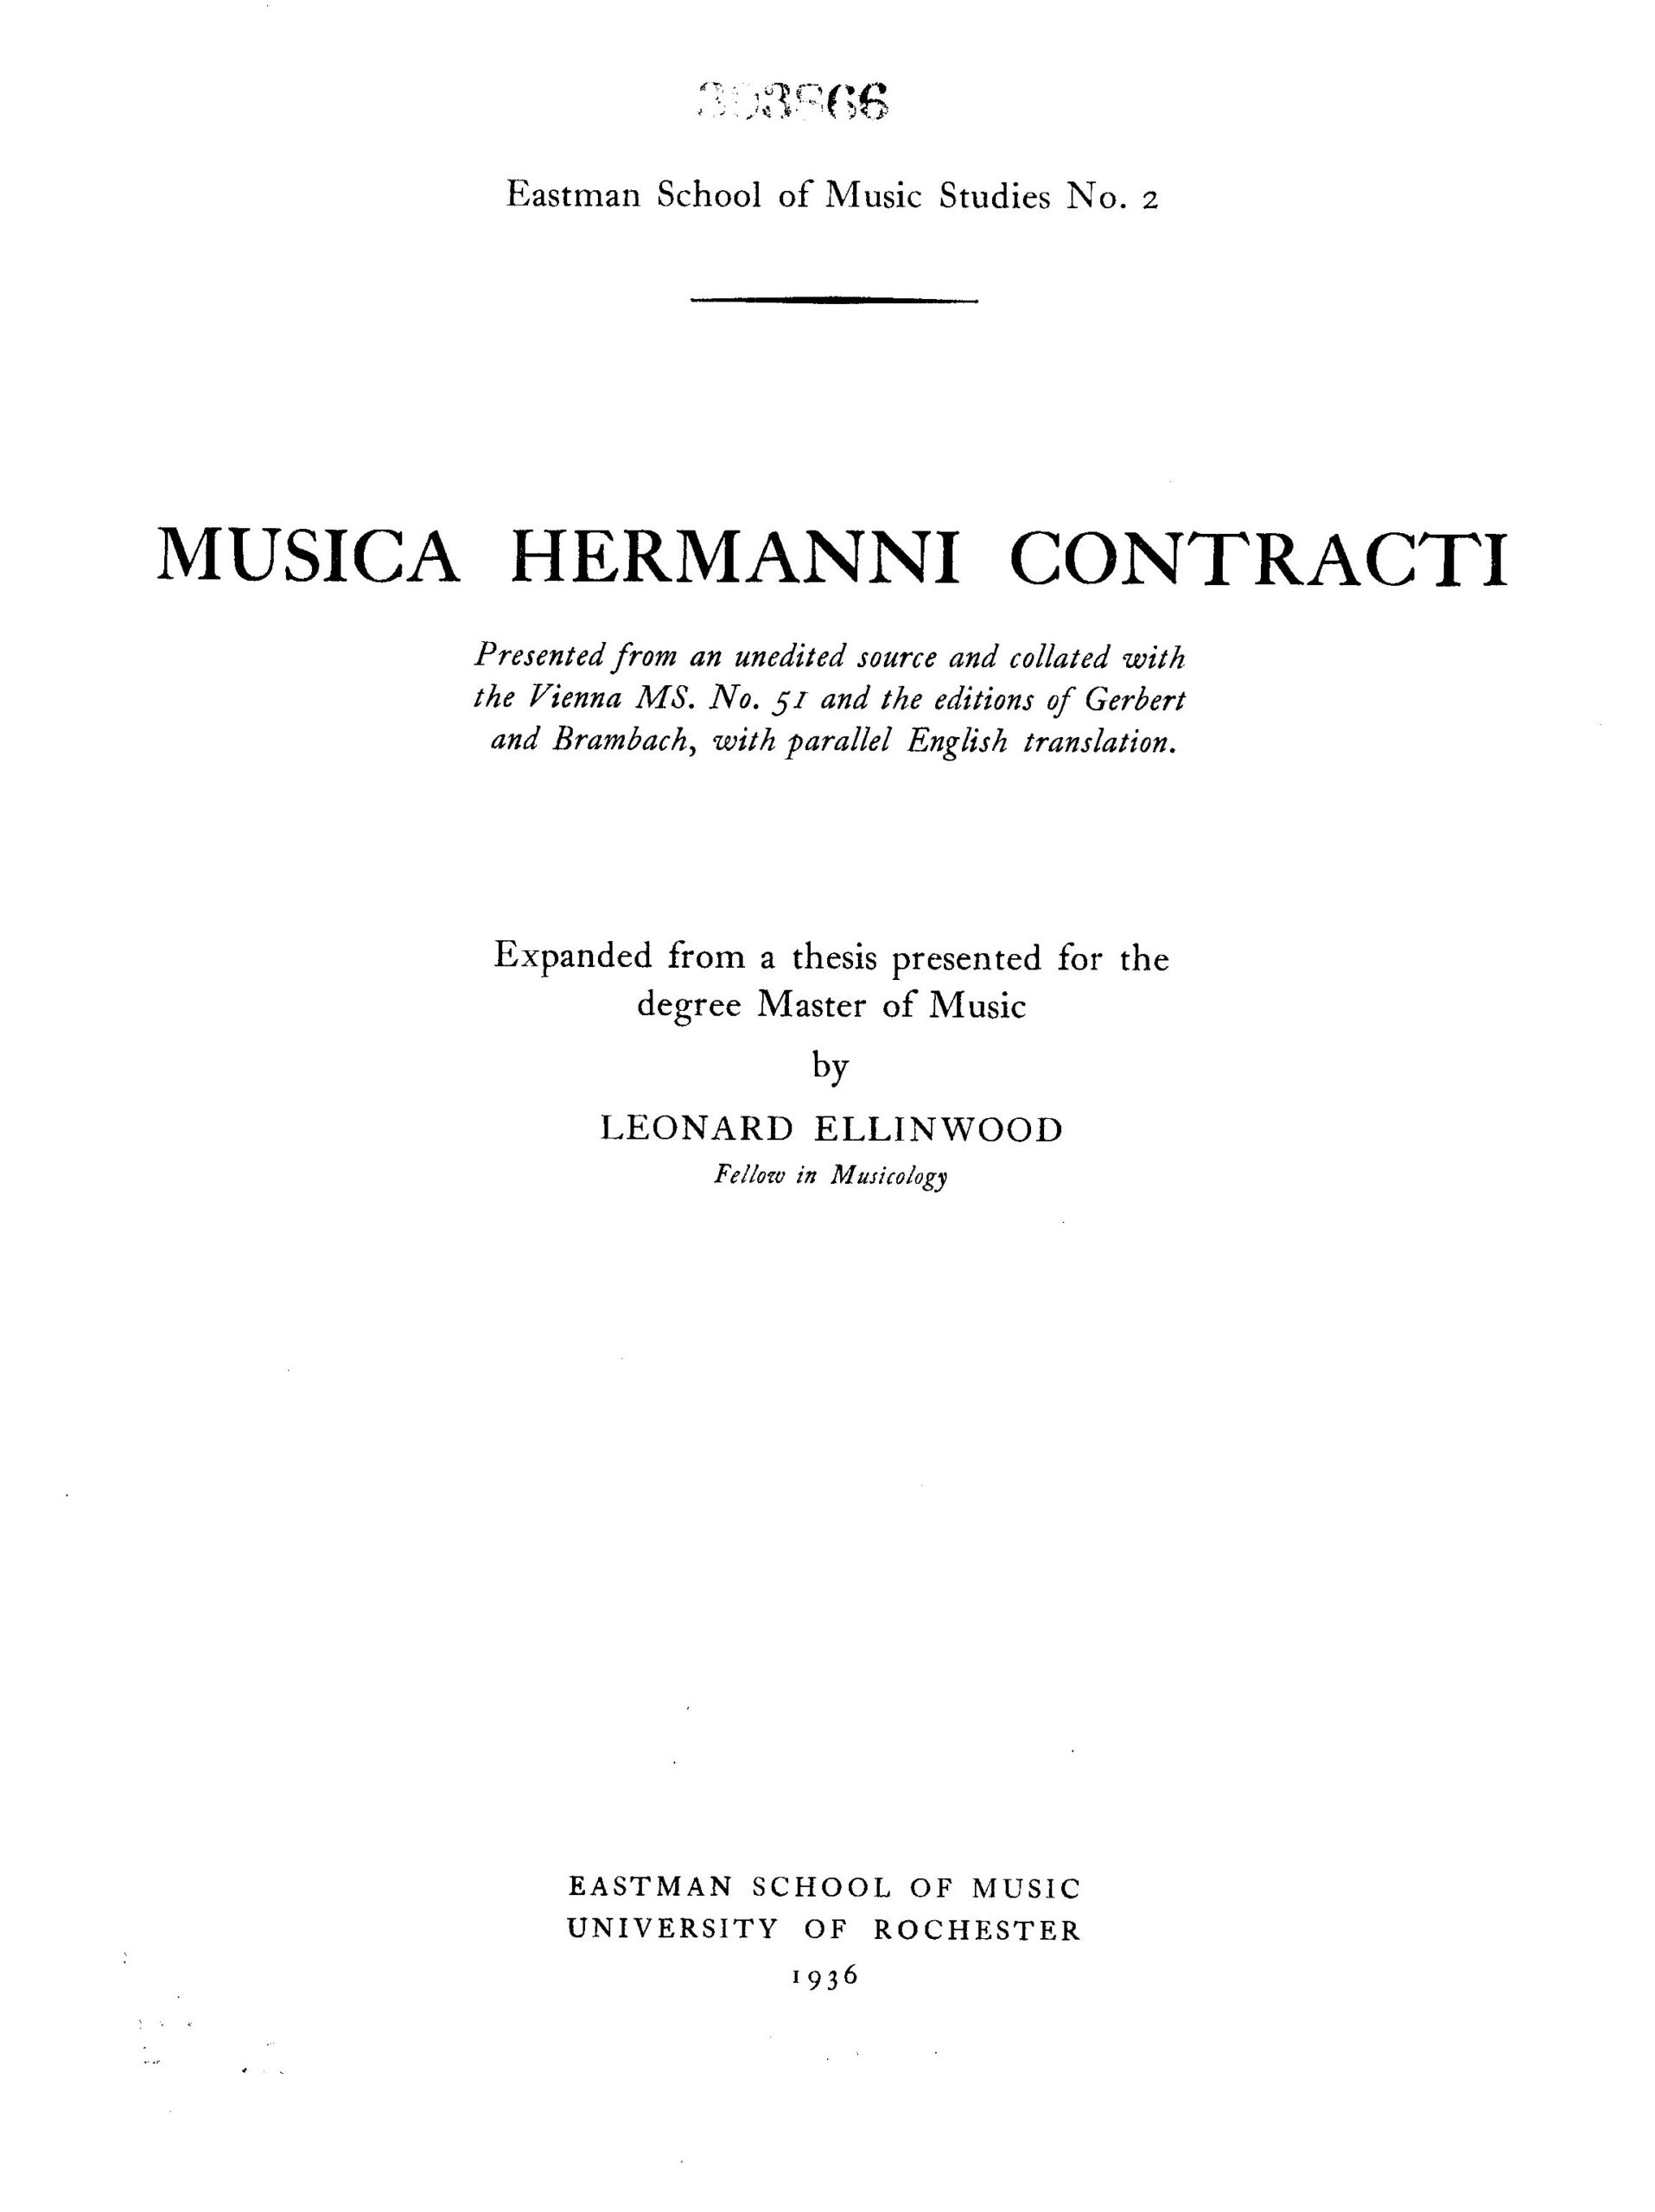 Ellinwood, Musica Hermanni Contracti, title page